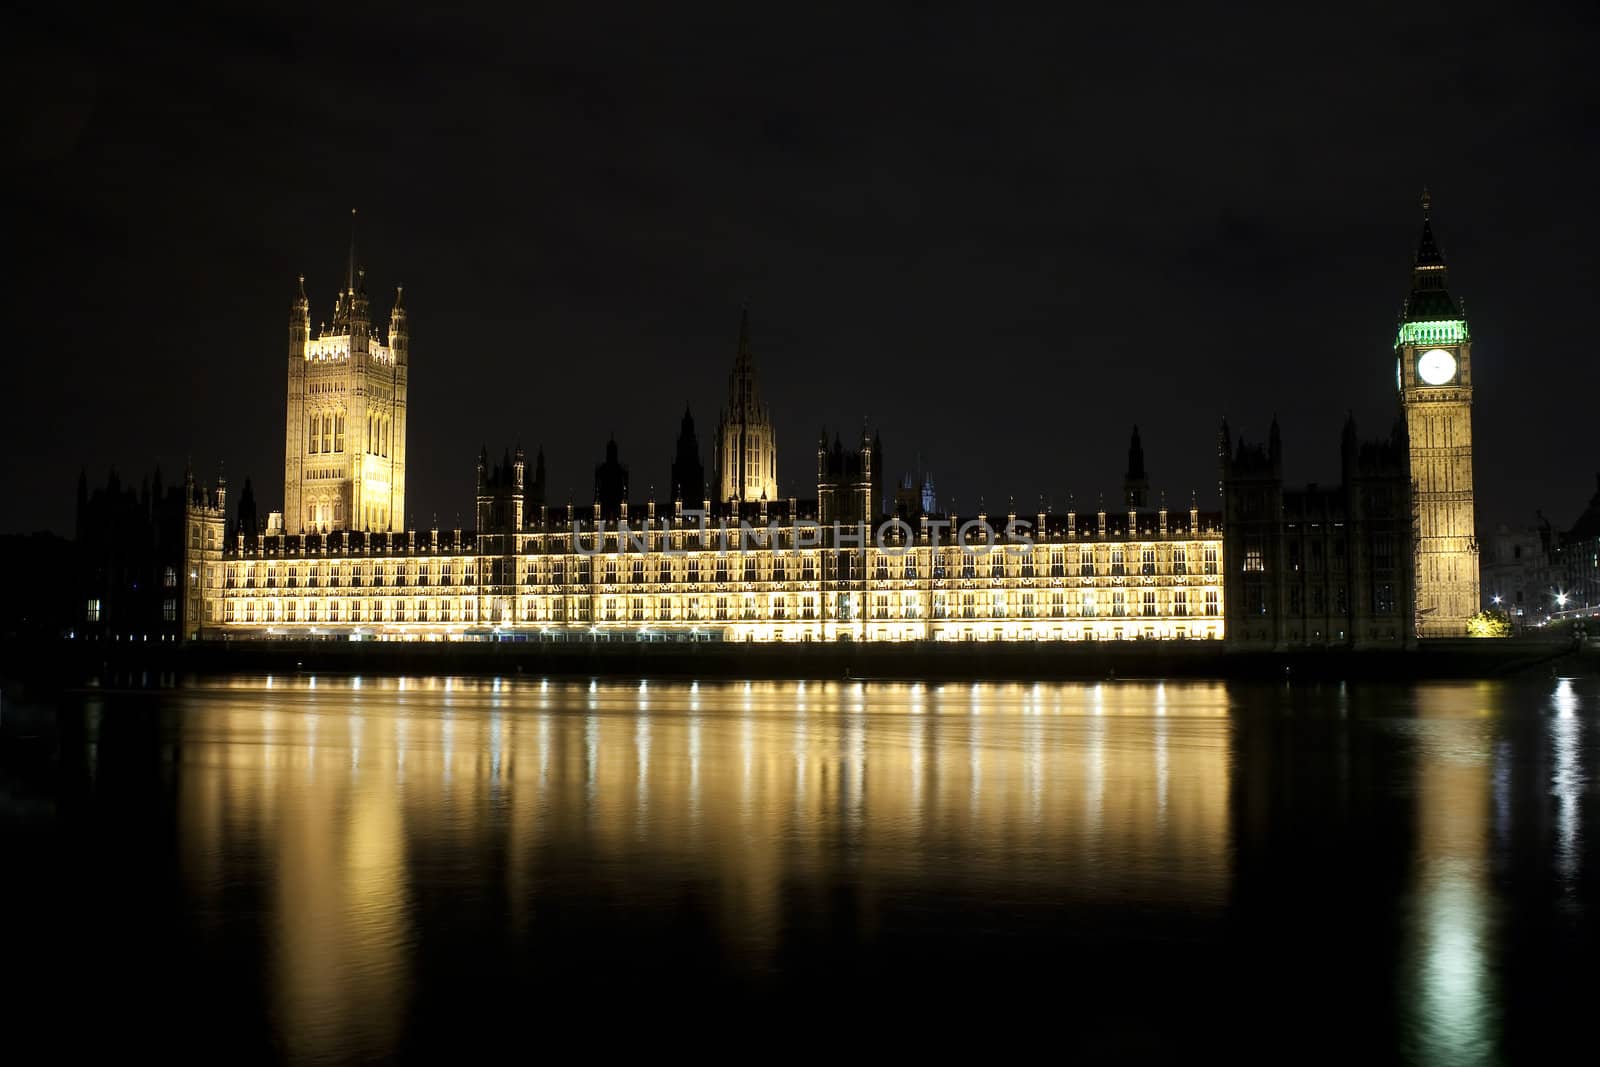 The Big Ben and the Parliament illuminated at night with reflections in the river